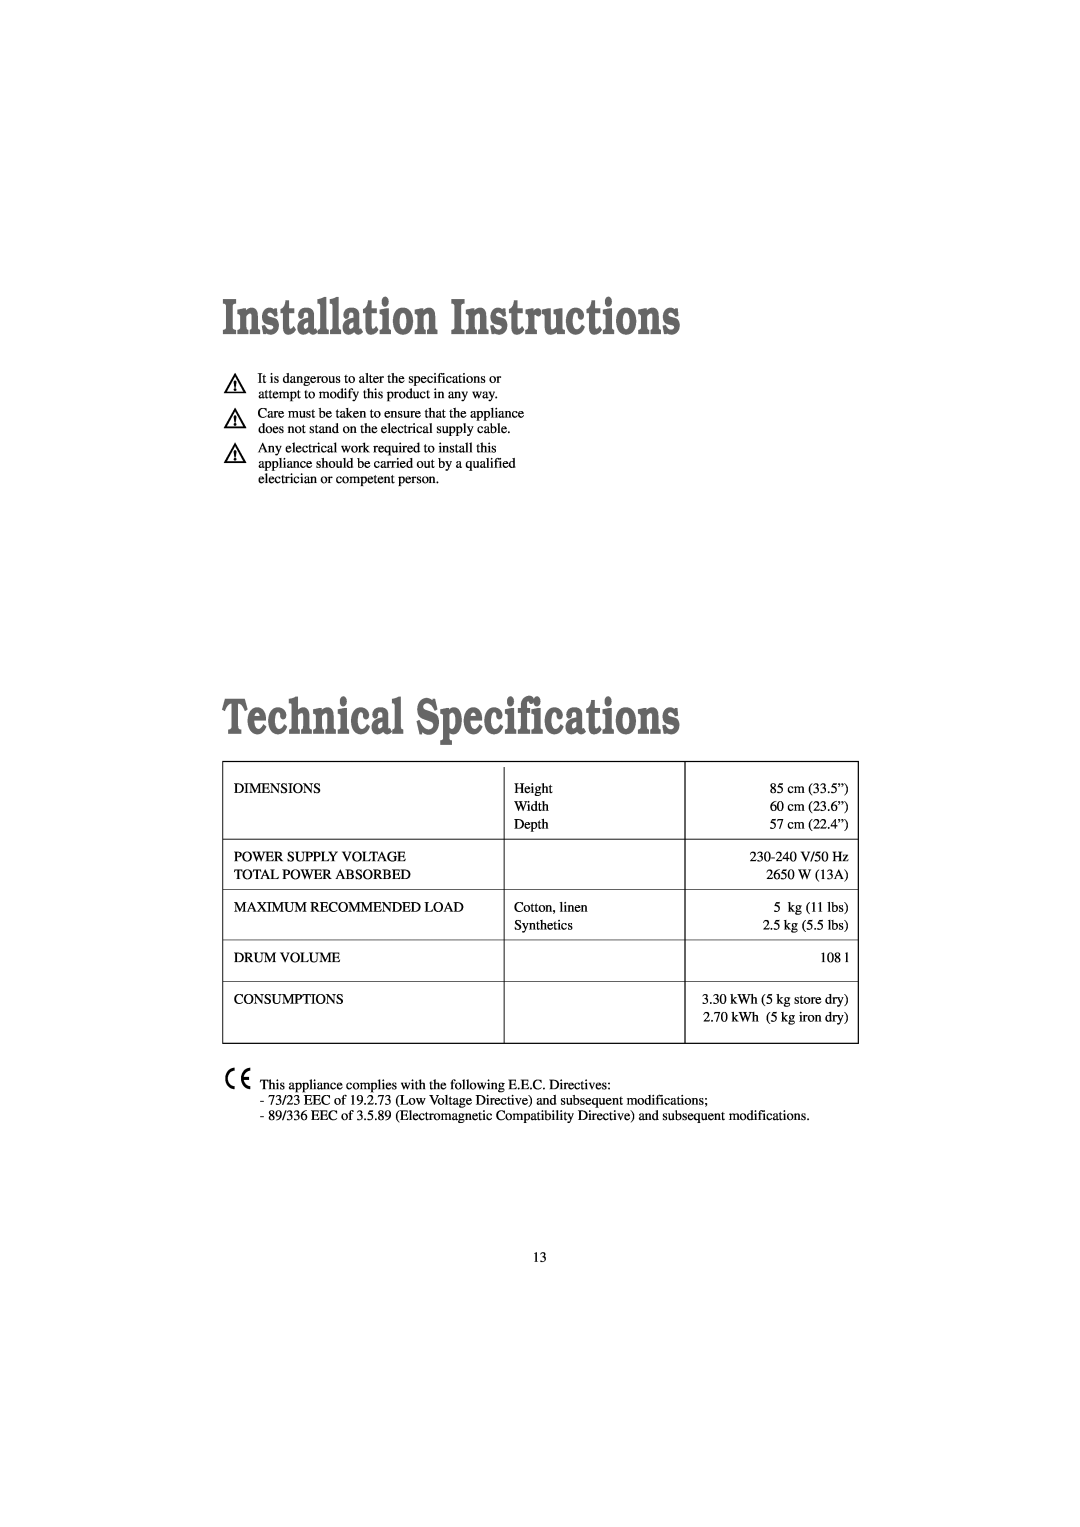 Zanussi TD 4100 W manual Installation Instructions, Technical Specifications 